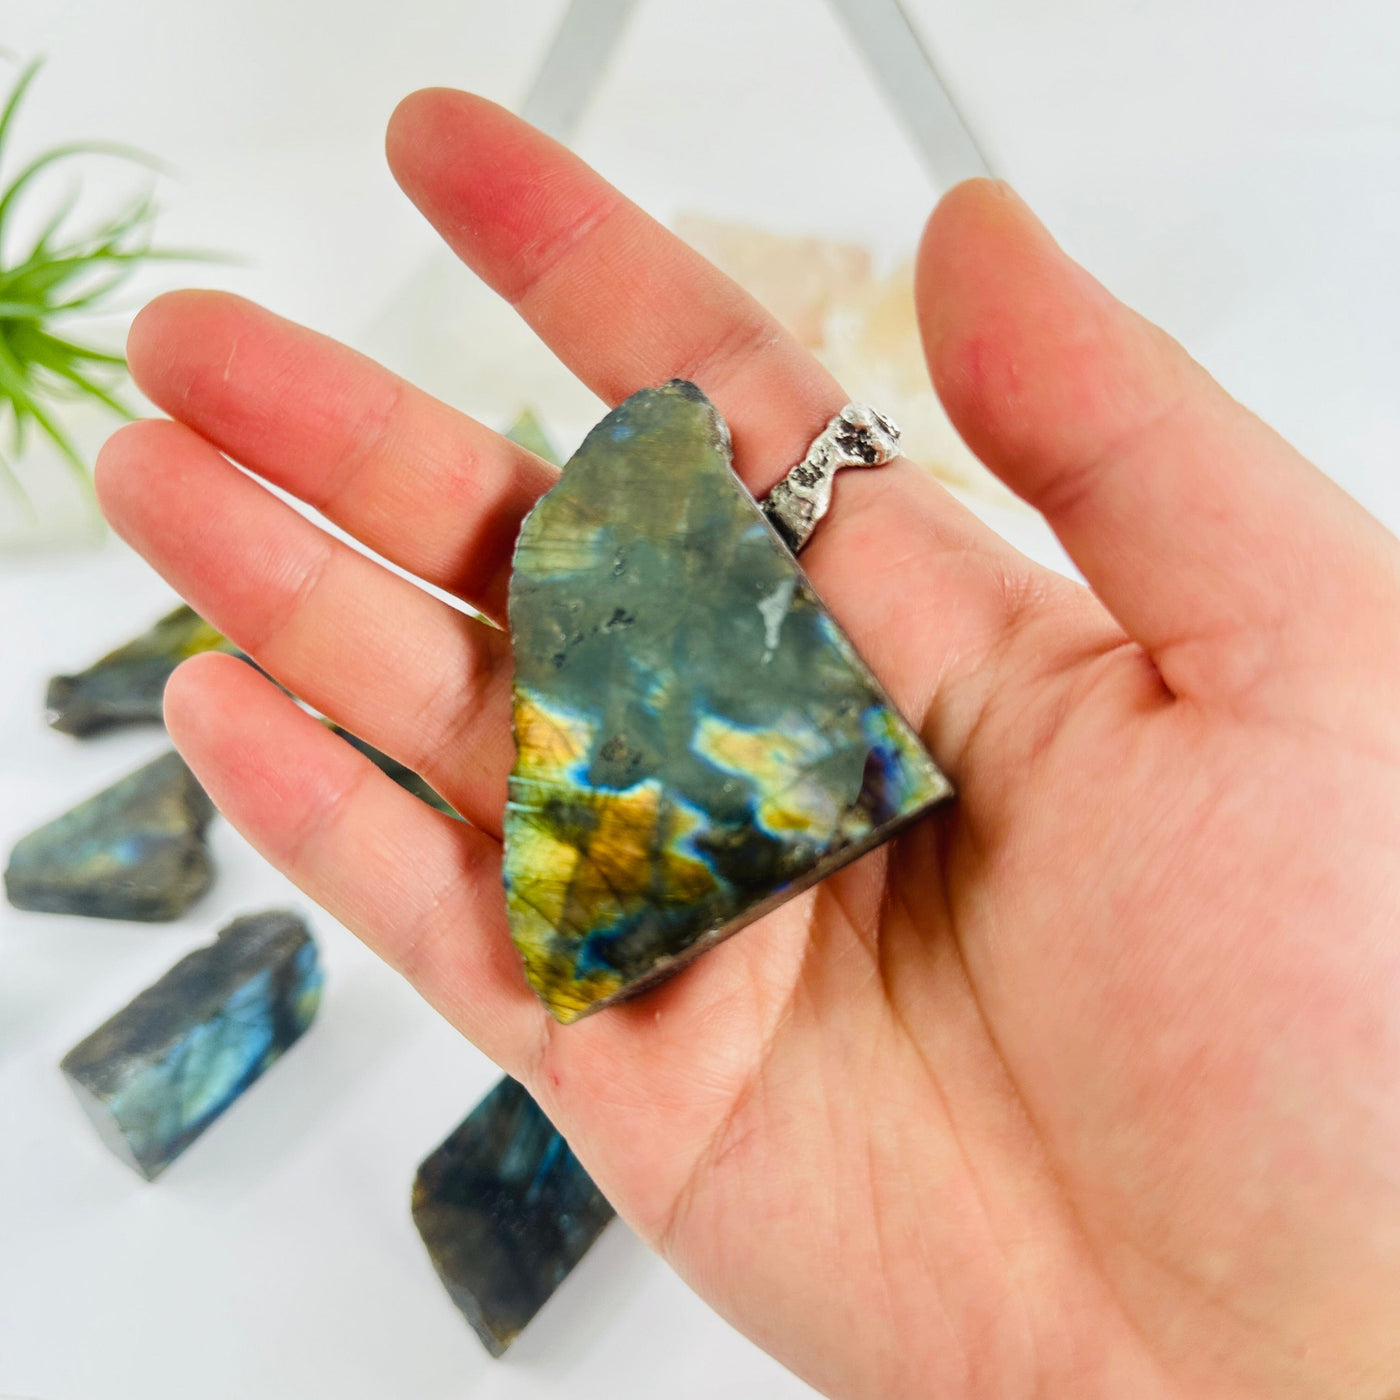 Labradorite Semi Polished Crystal Slab - YOU CHOOSE - variant A in hand for size reference